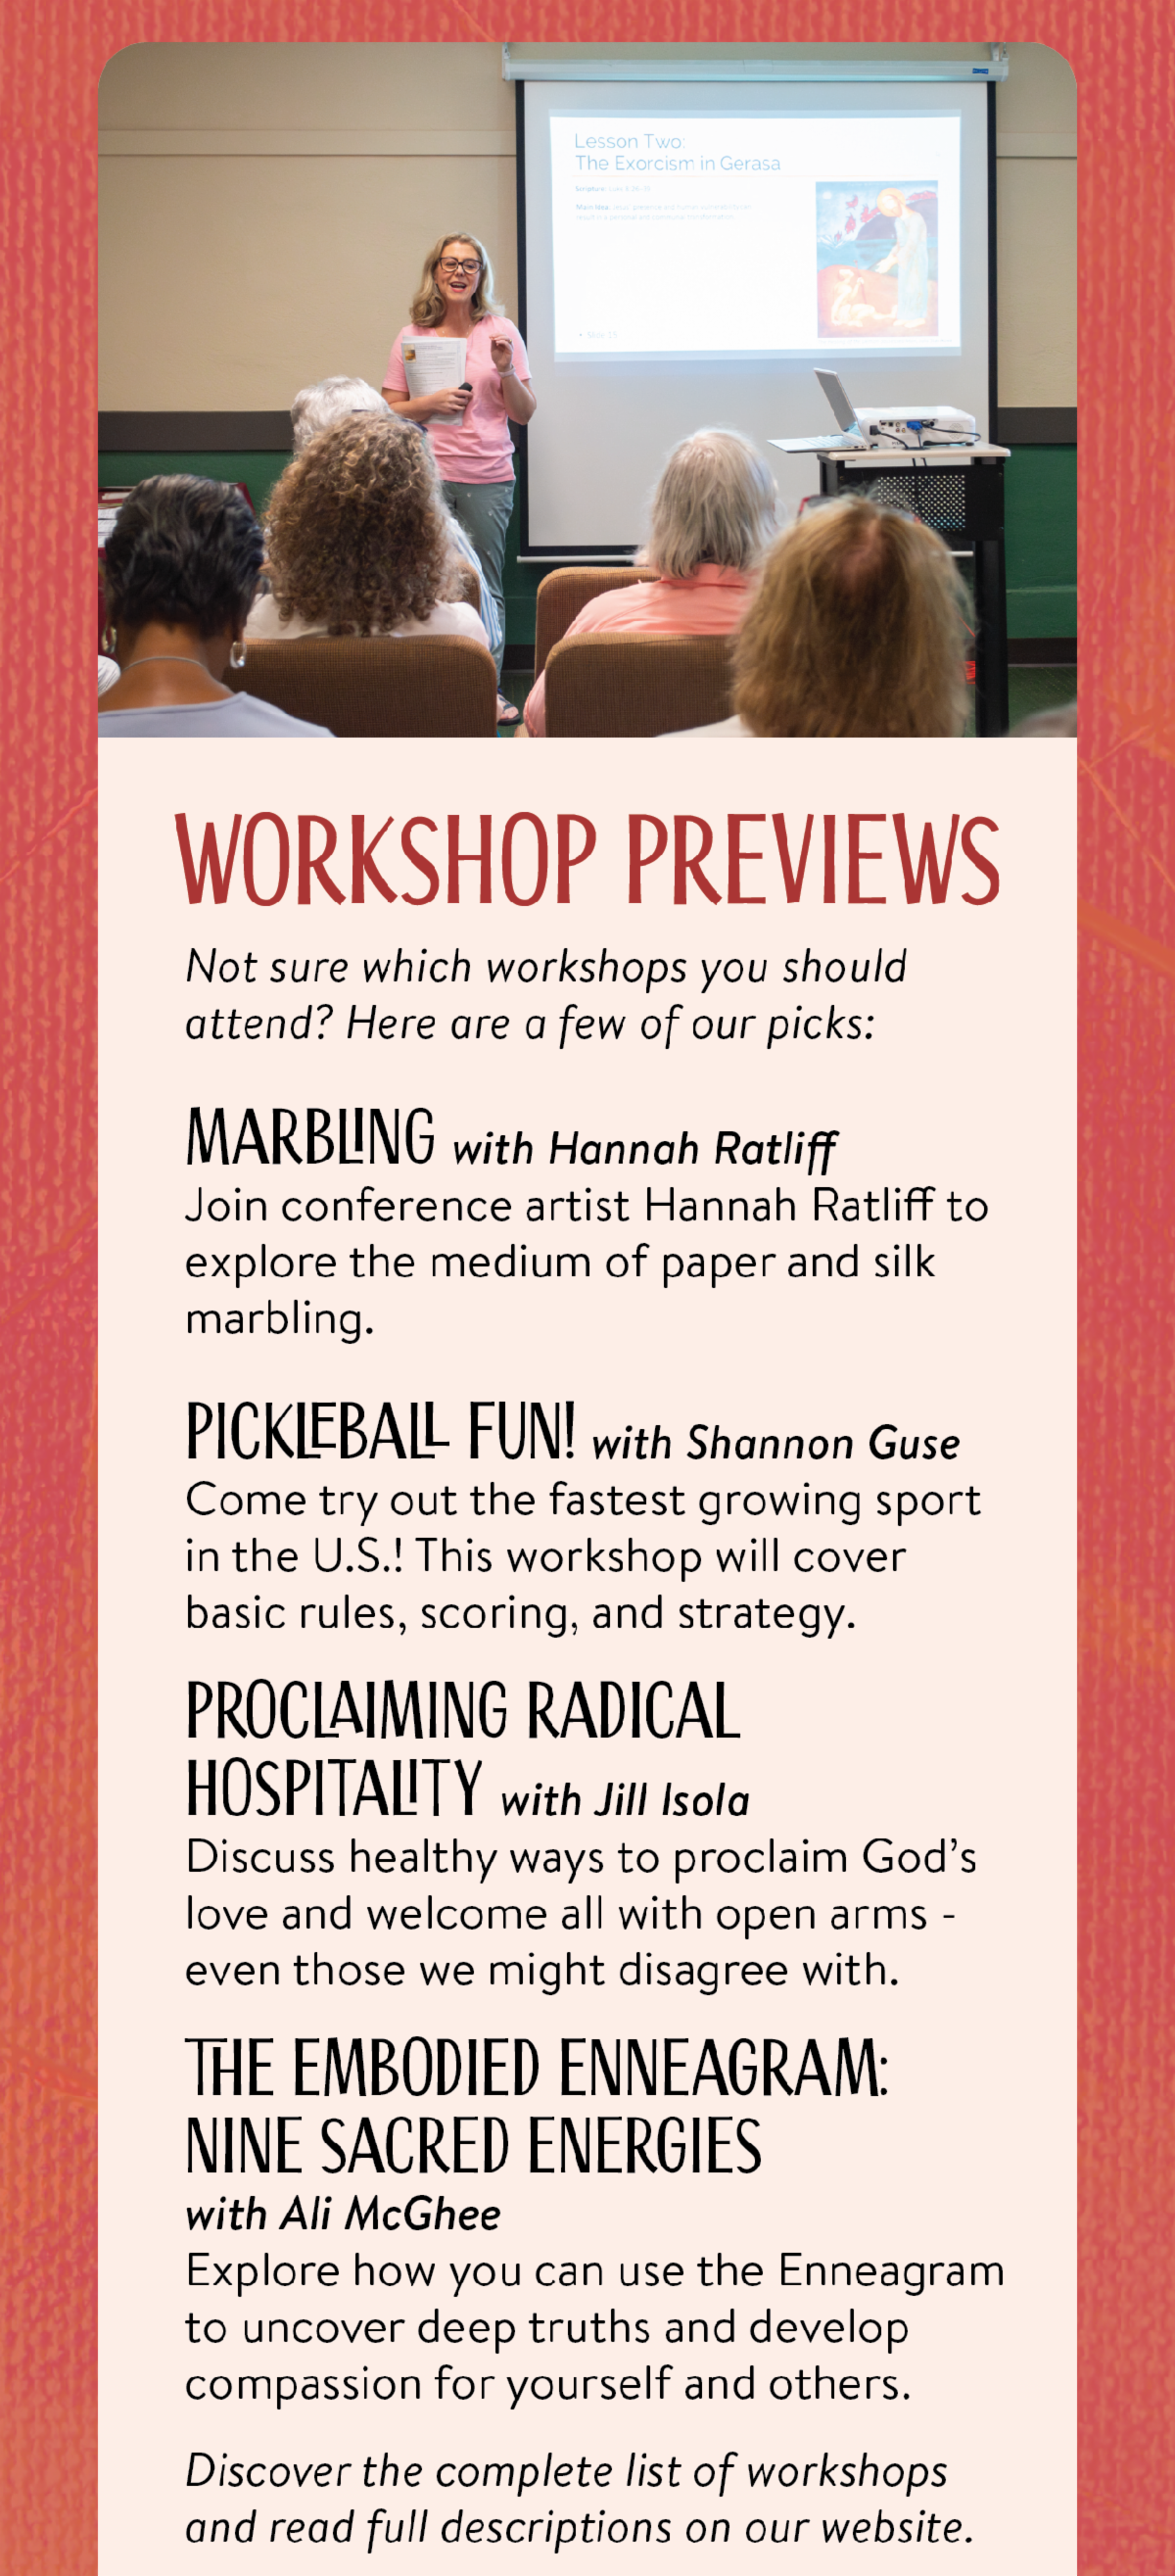 Workshop Previews - Not sure which workshops you should attend? Here are a few of our picks: Marbling with Hannah RatliffJoin conference artist Hannah Ratliff to explore the medium of paper and silk marbling. Pickleball Fun! with Shannon GuseCome try out the fastest growing sport in the U.S.! This workshop will cover basic rules, scoring, and strategy. Proclaiming Radical Hospitality with Jill IsolaDiscuss healthy ways to proclaim God’s love and welcome all with open arms - even those we might disagree with. The Embodied Enneagram:Nine Sacred Energies with Ali McGheeExplore how you can use the Enneagram to uncover deep truths and develop compassion for yourself and others. Discover the complete list of workshops and read full descriptions on our website.